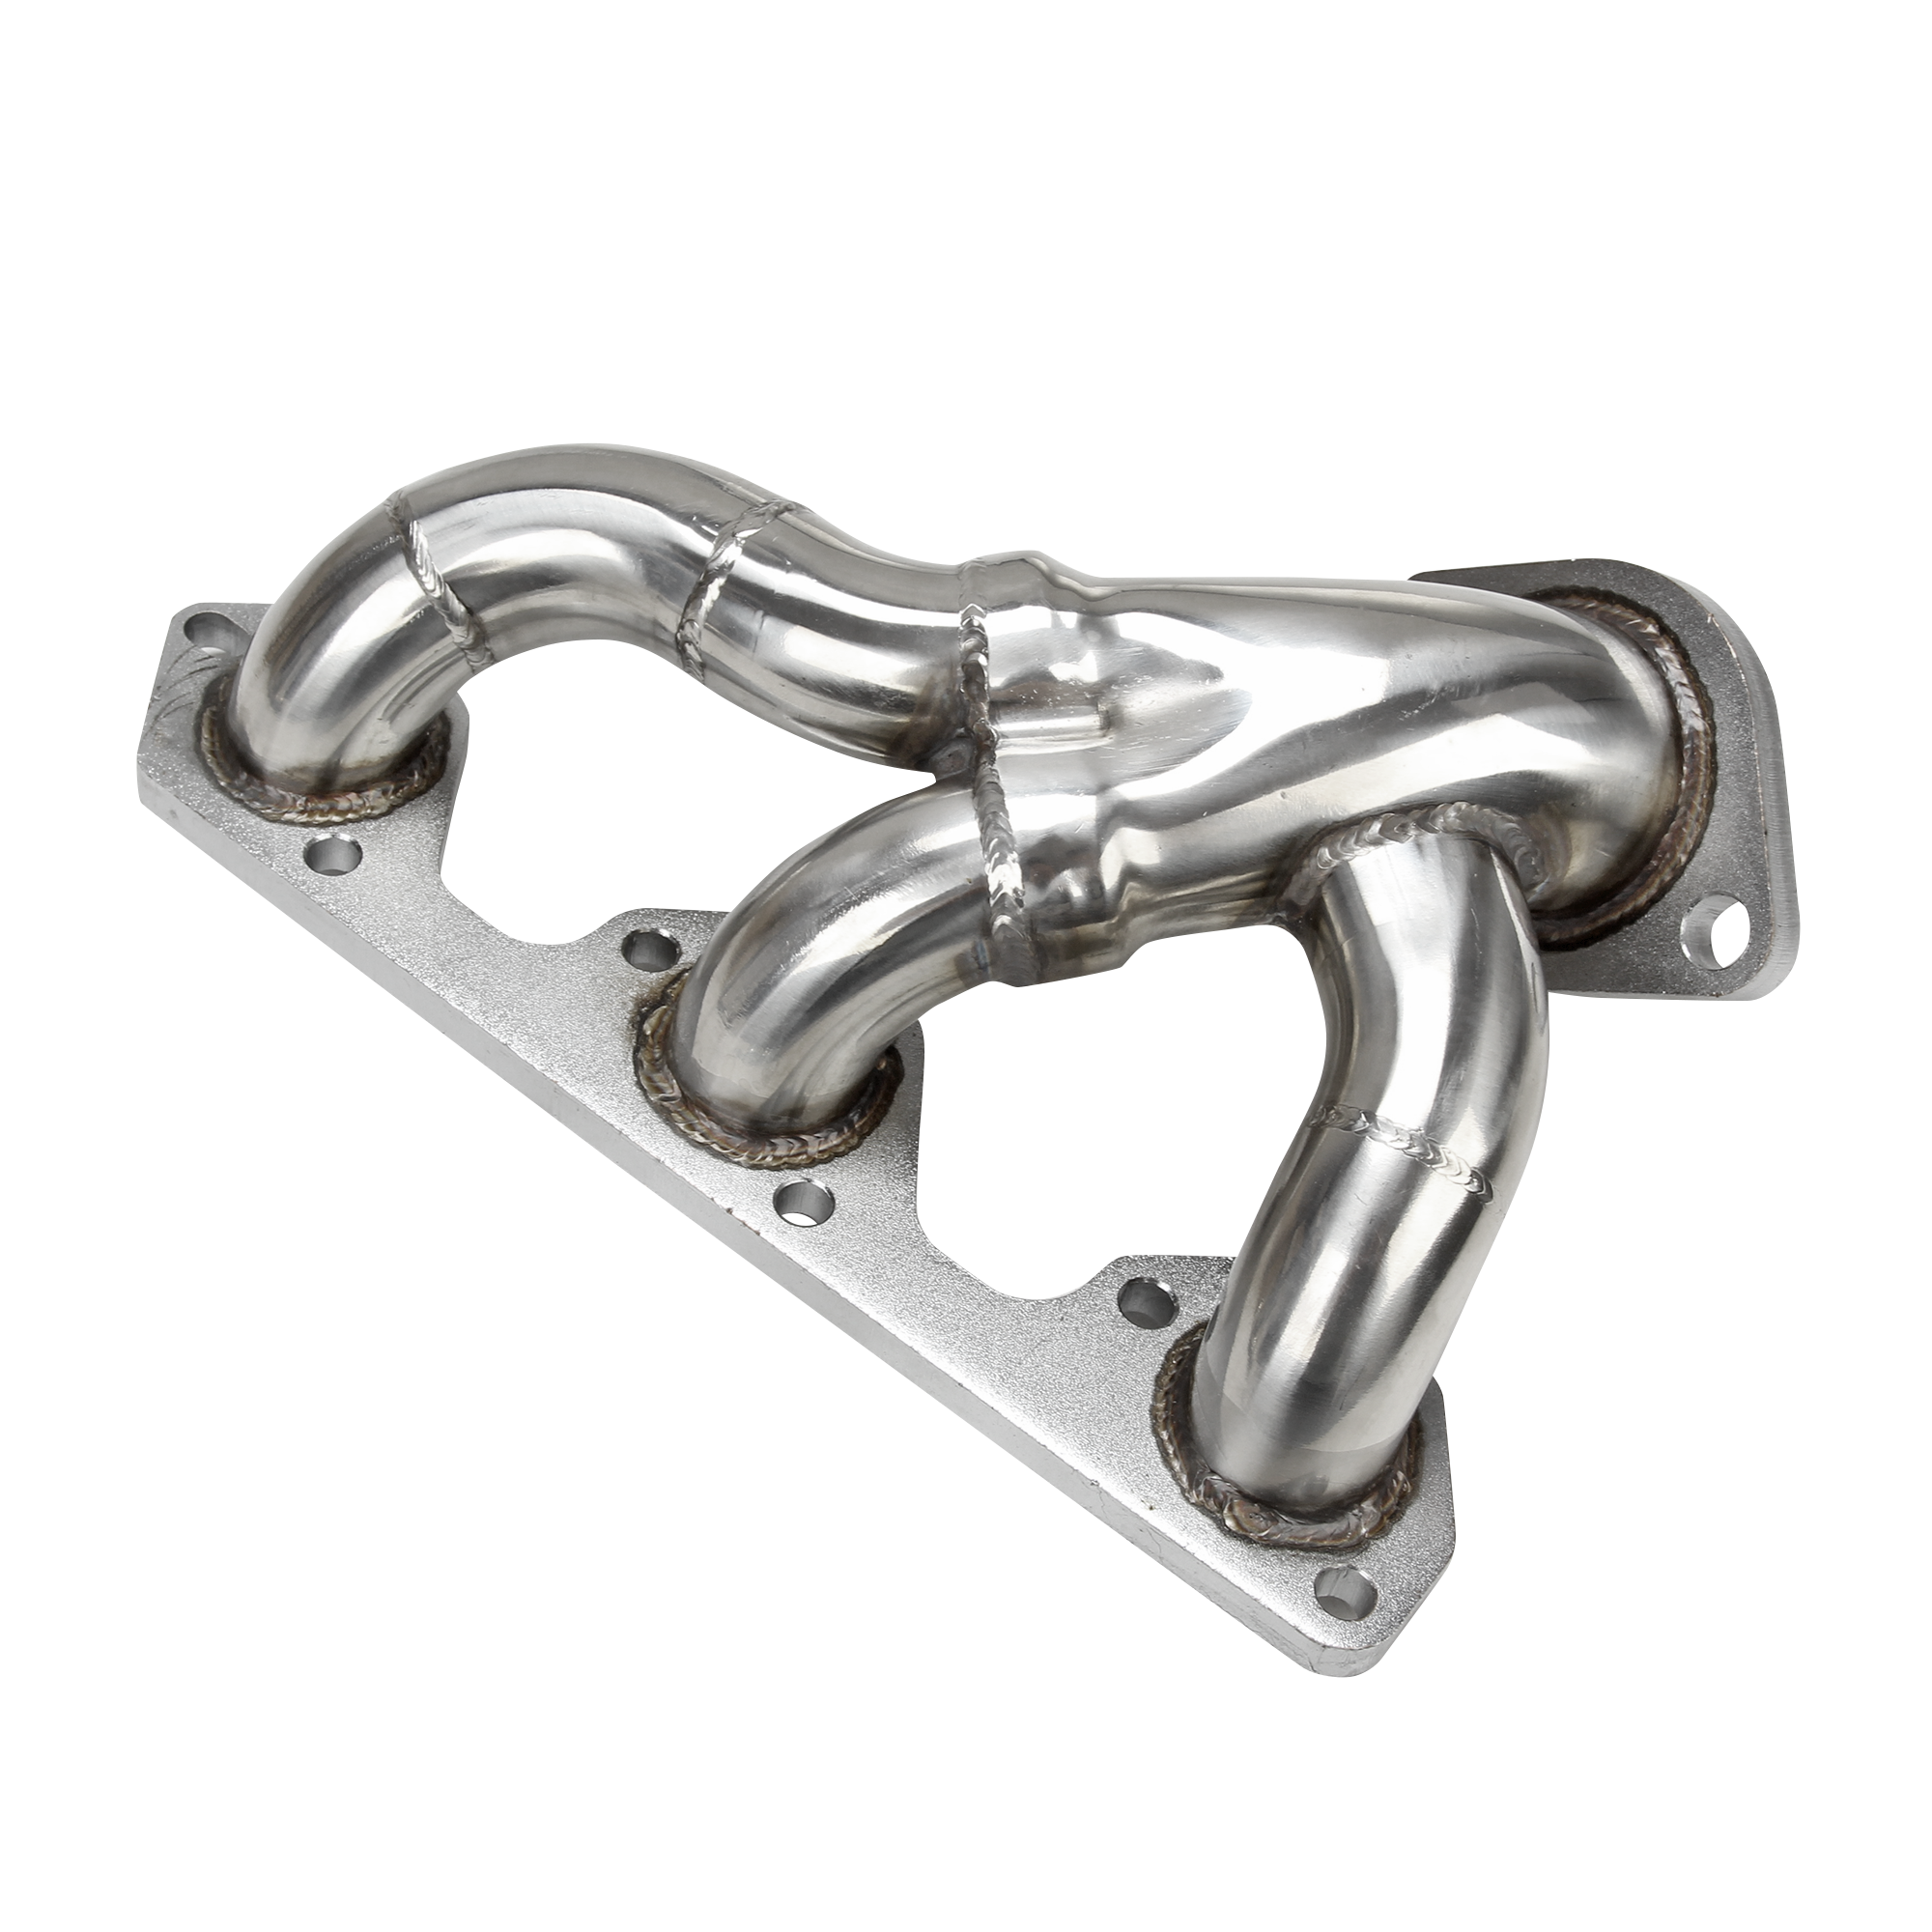 Exhaust Header for Shorty, Steel, Ceramic, Ford Mustang, 3.8, 3.9L, V6, Pair